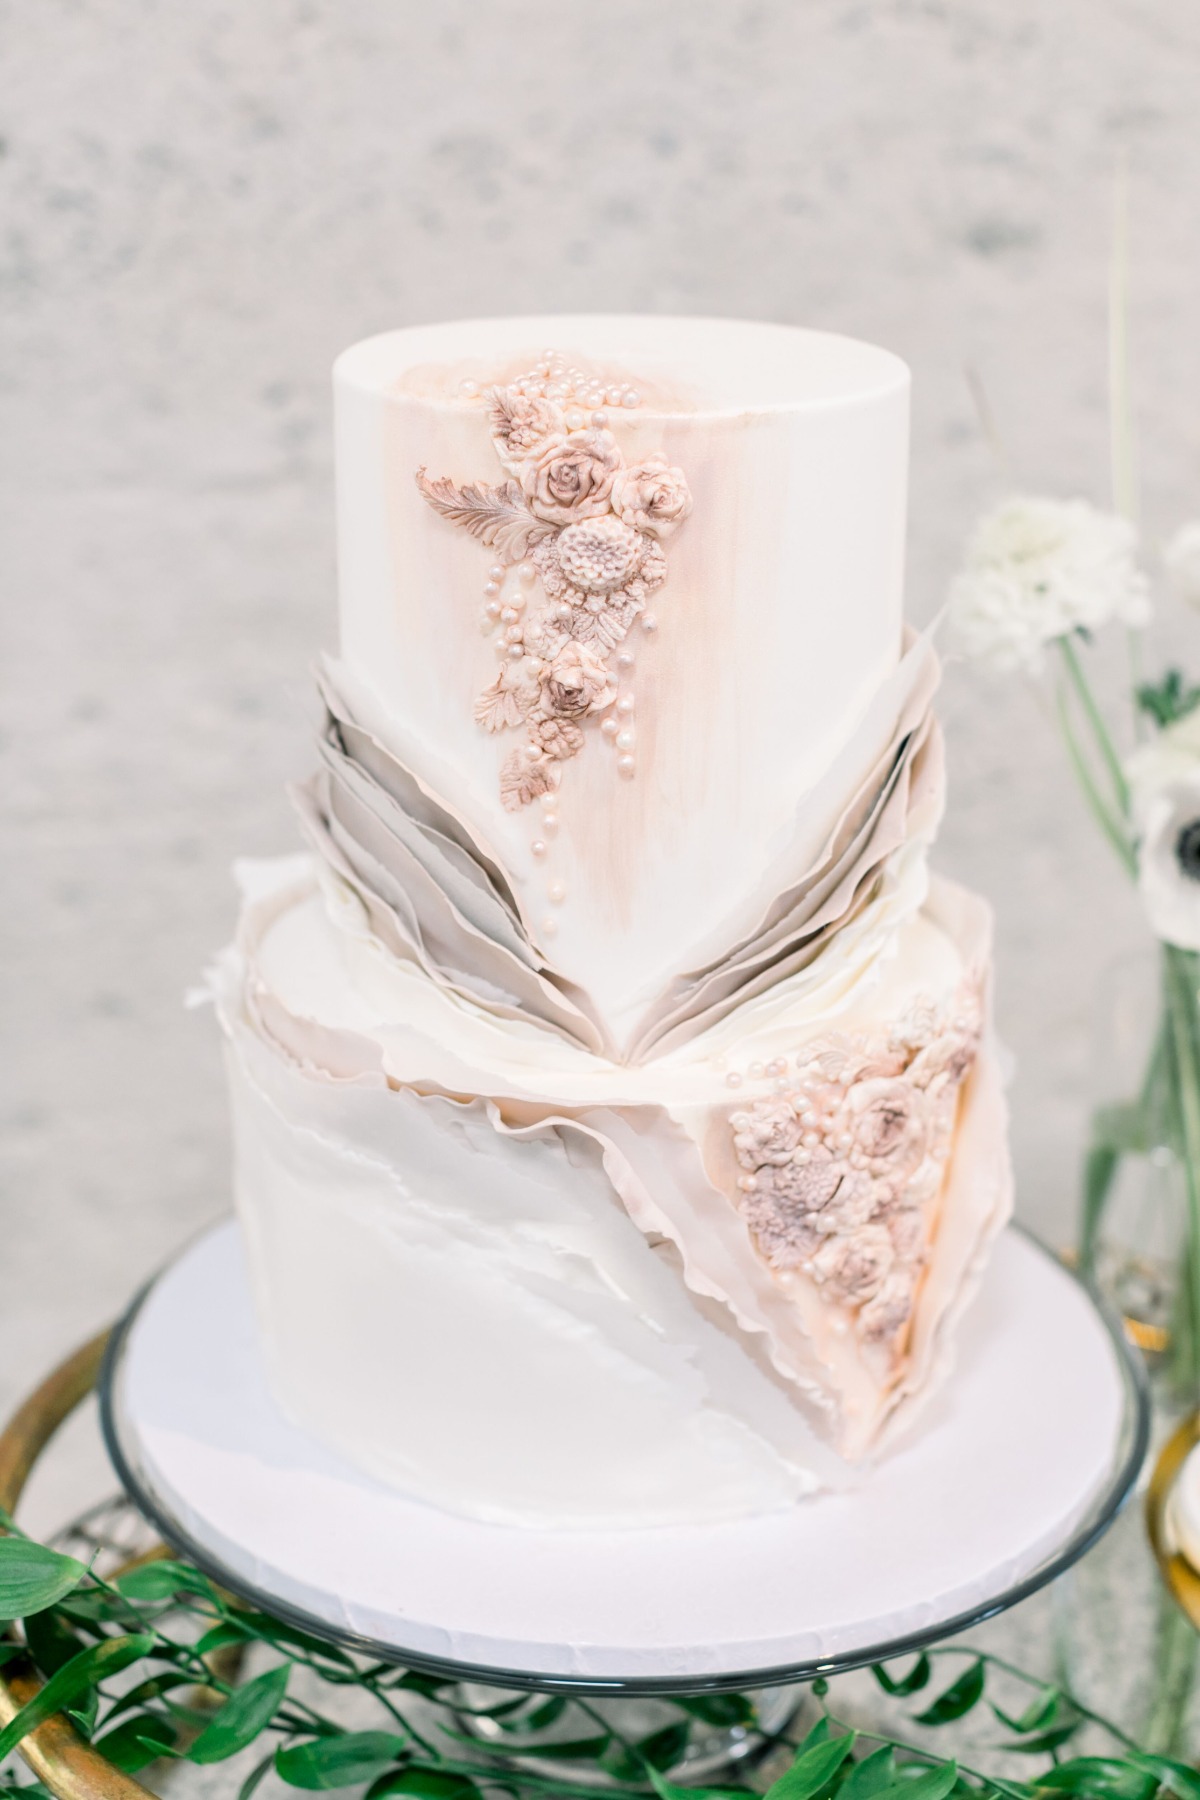 intricate and fancy wedding cake by Vanilla bake shop